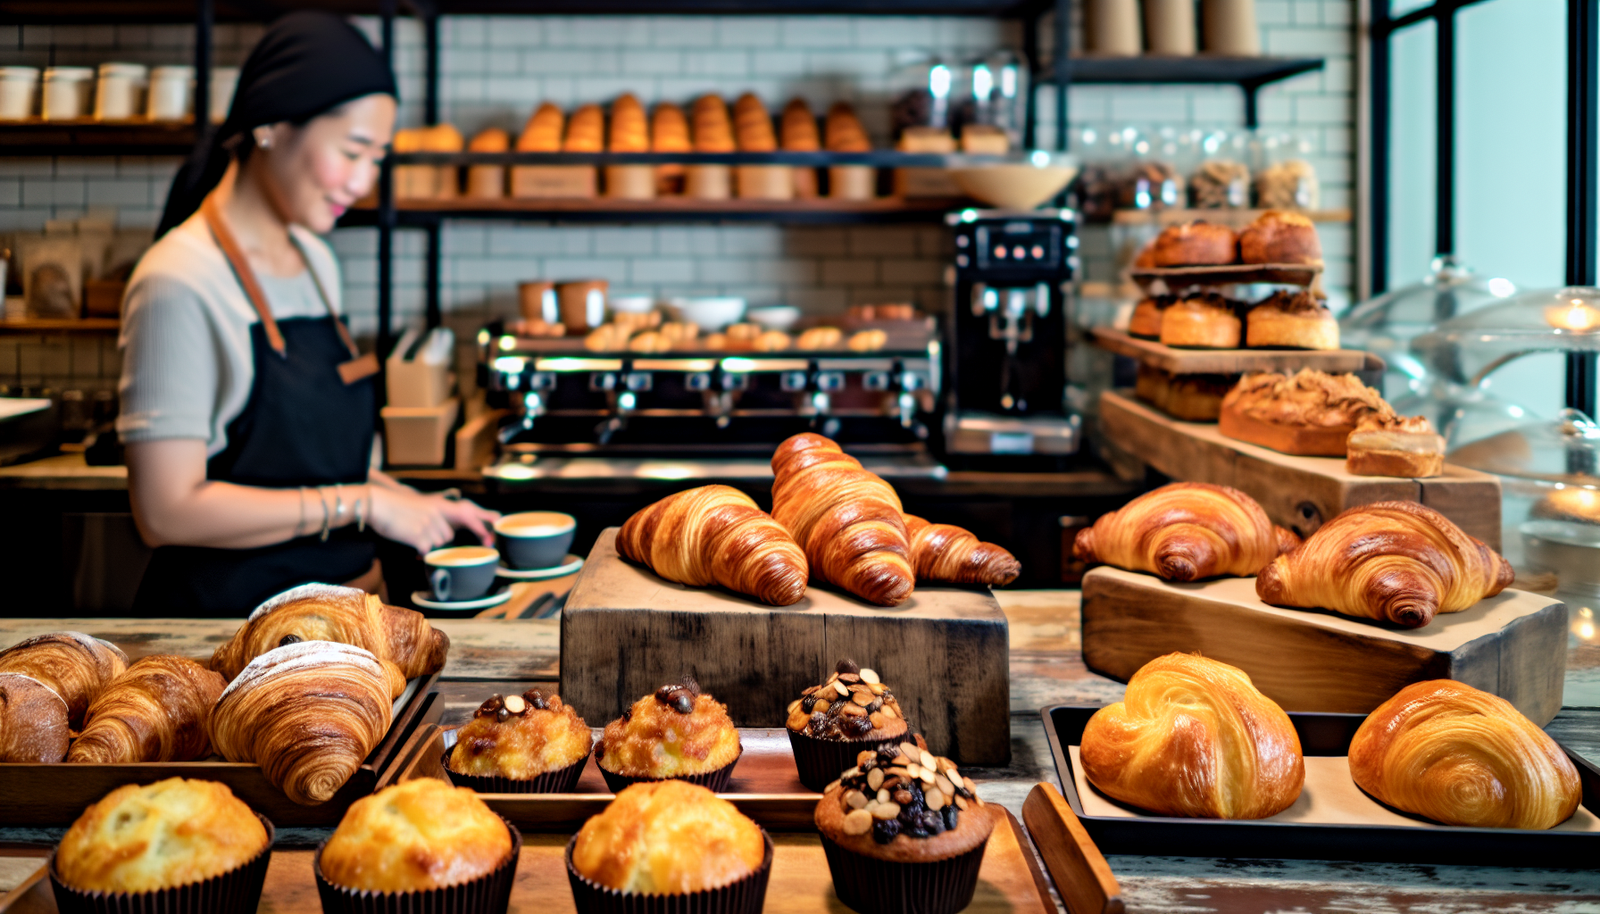 A selection of artisan pastries and savory sandwiches in a coffee shop